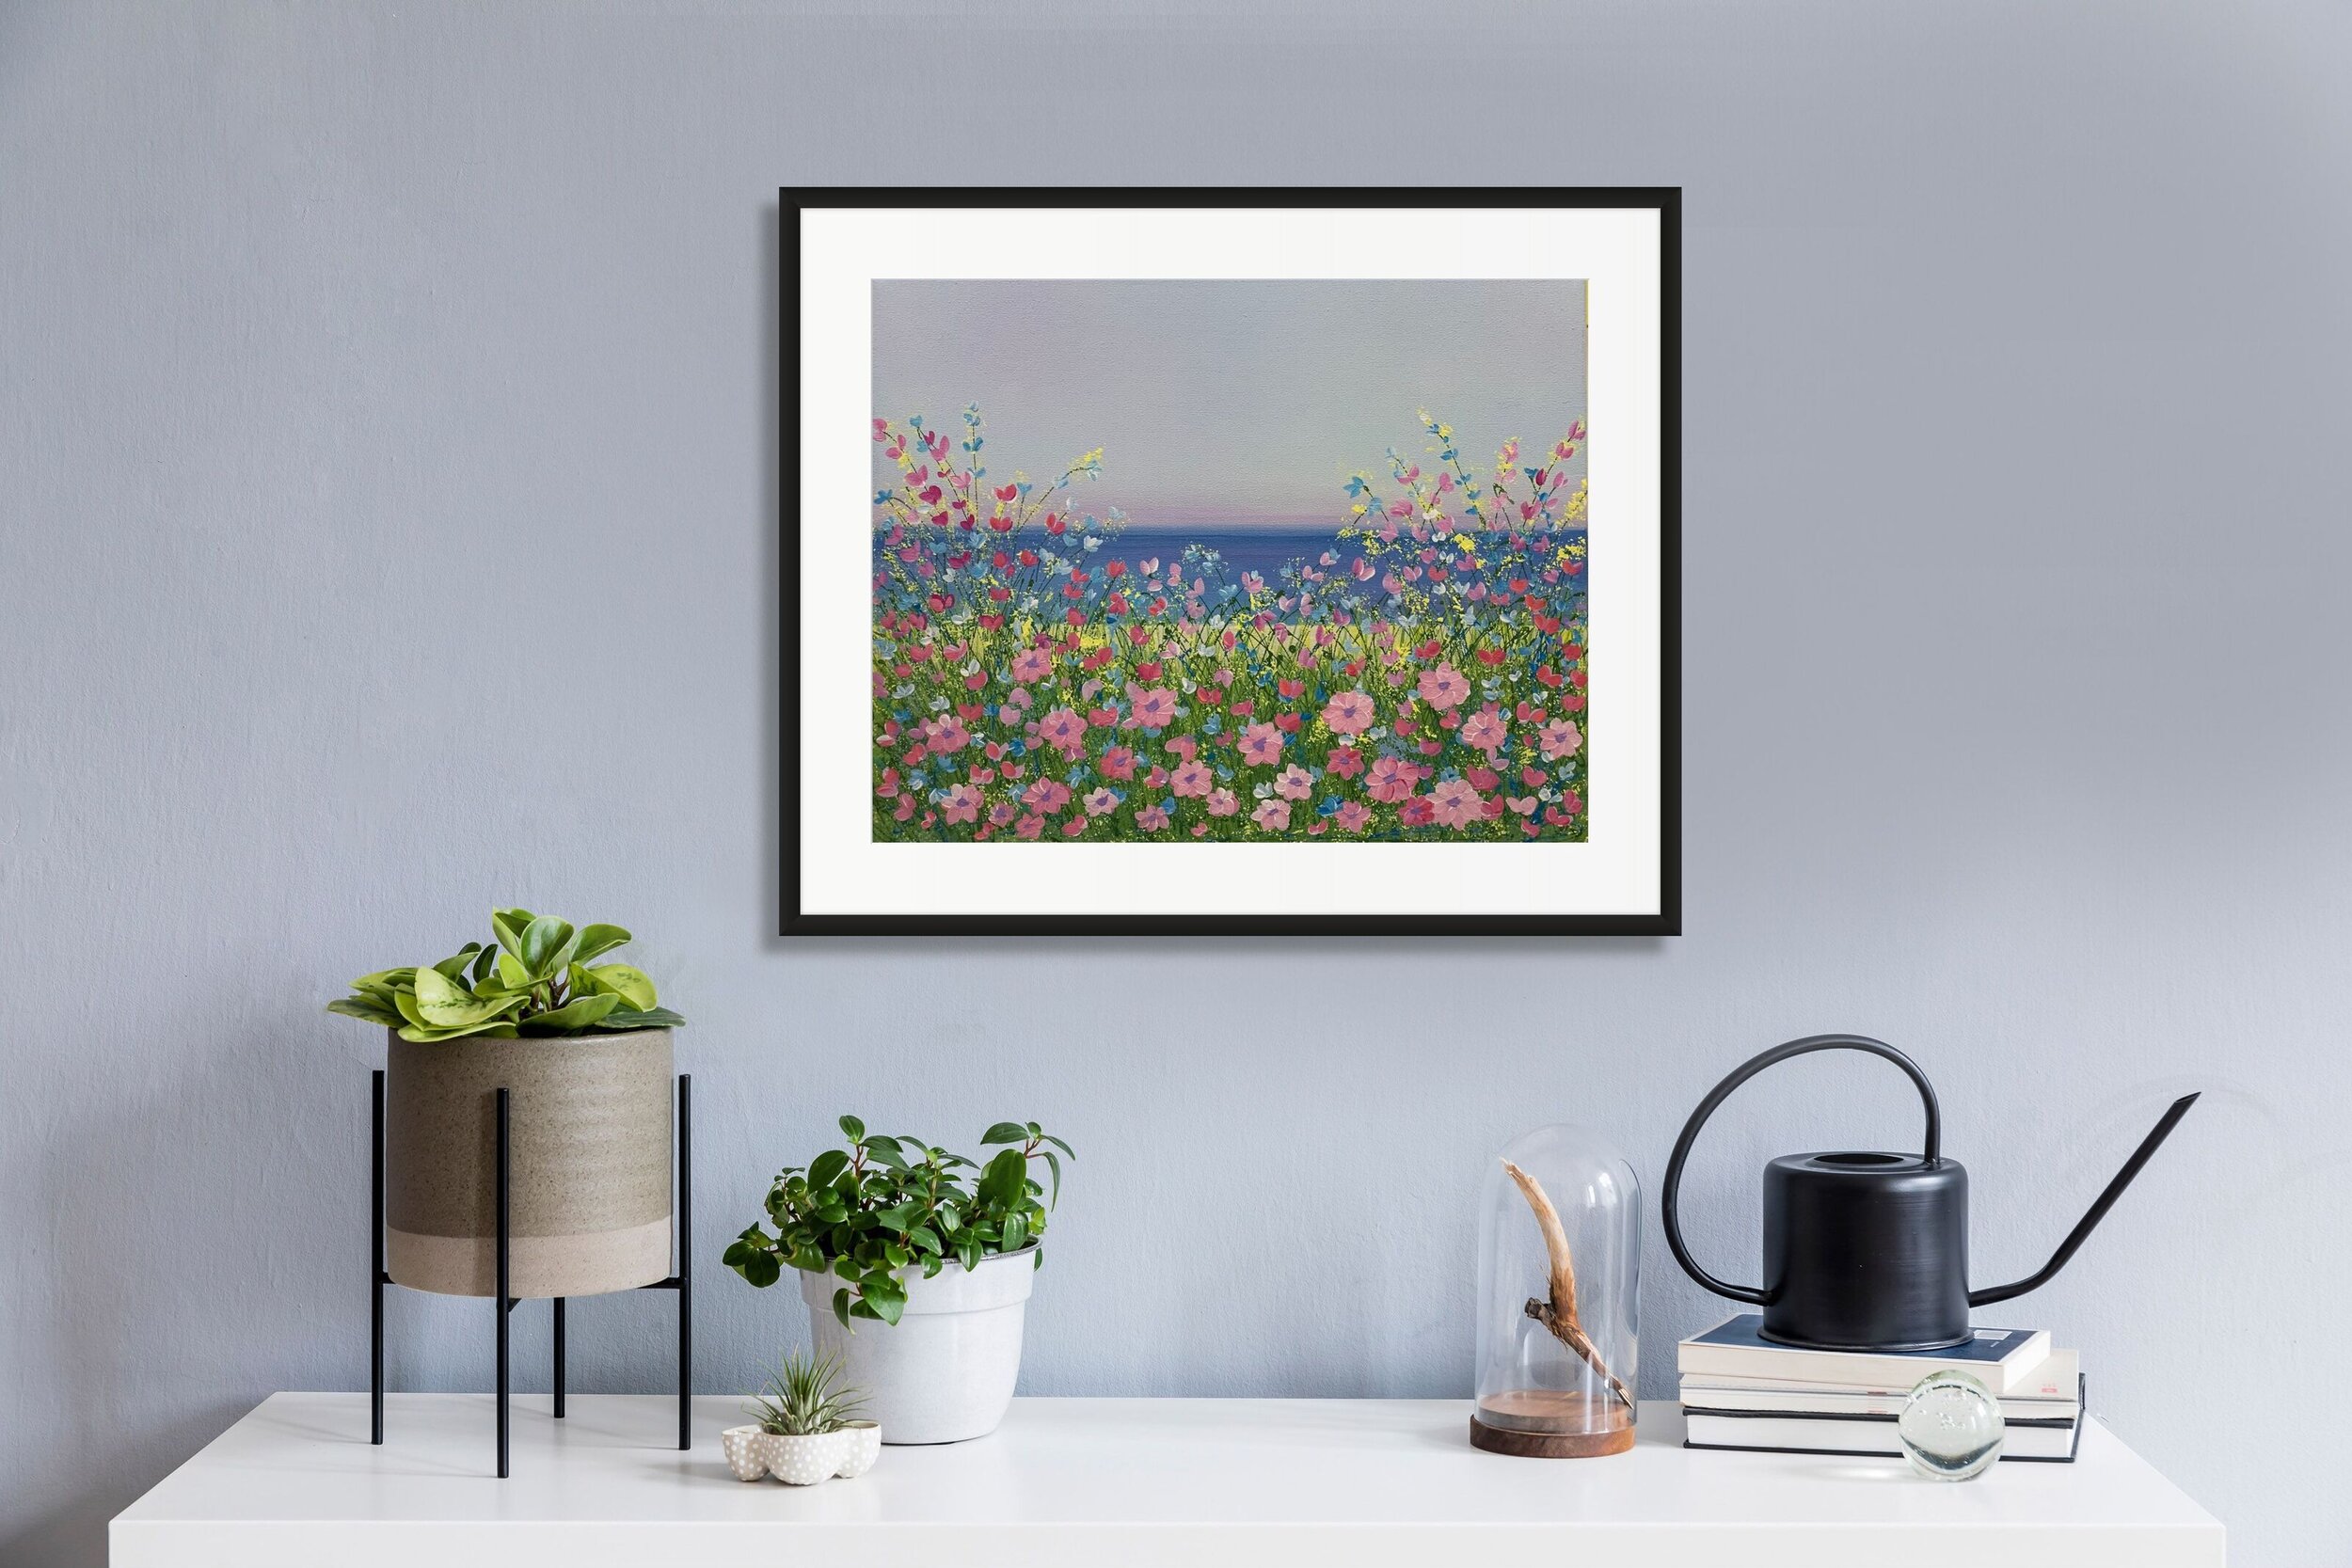 whimsical floral lakeside art above potted plants.jpg